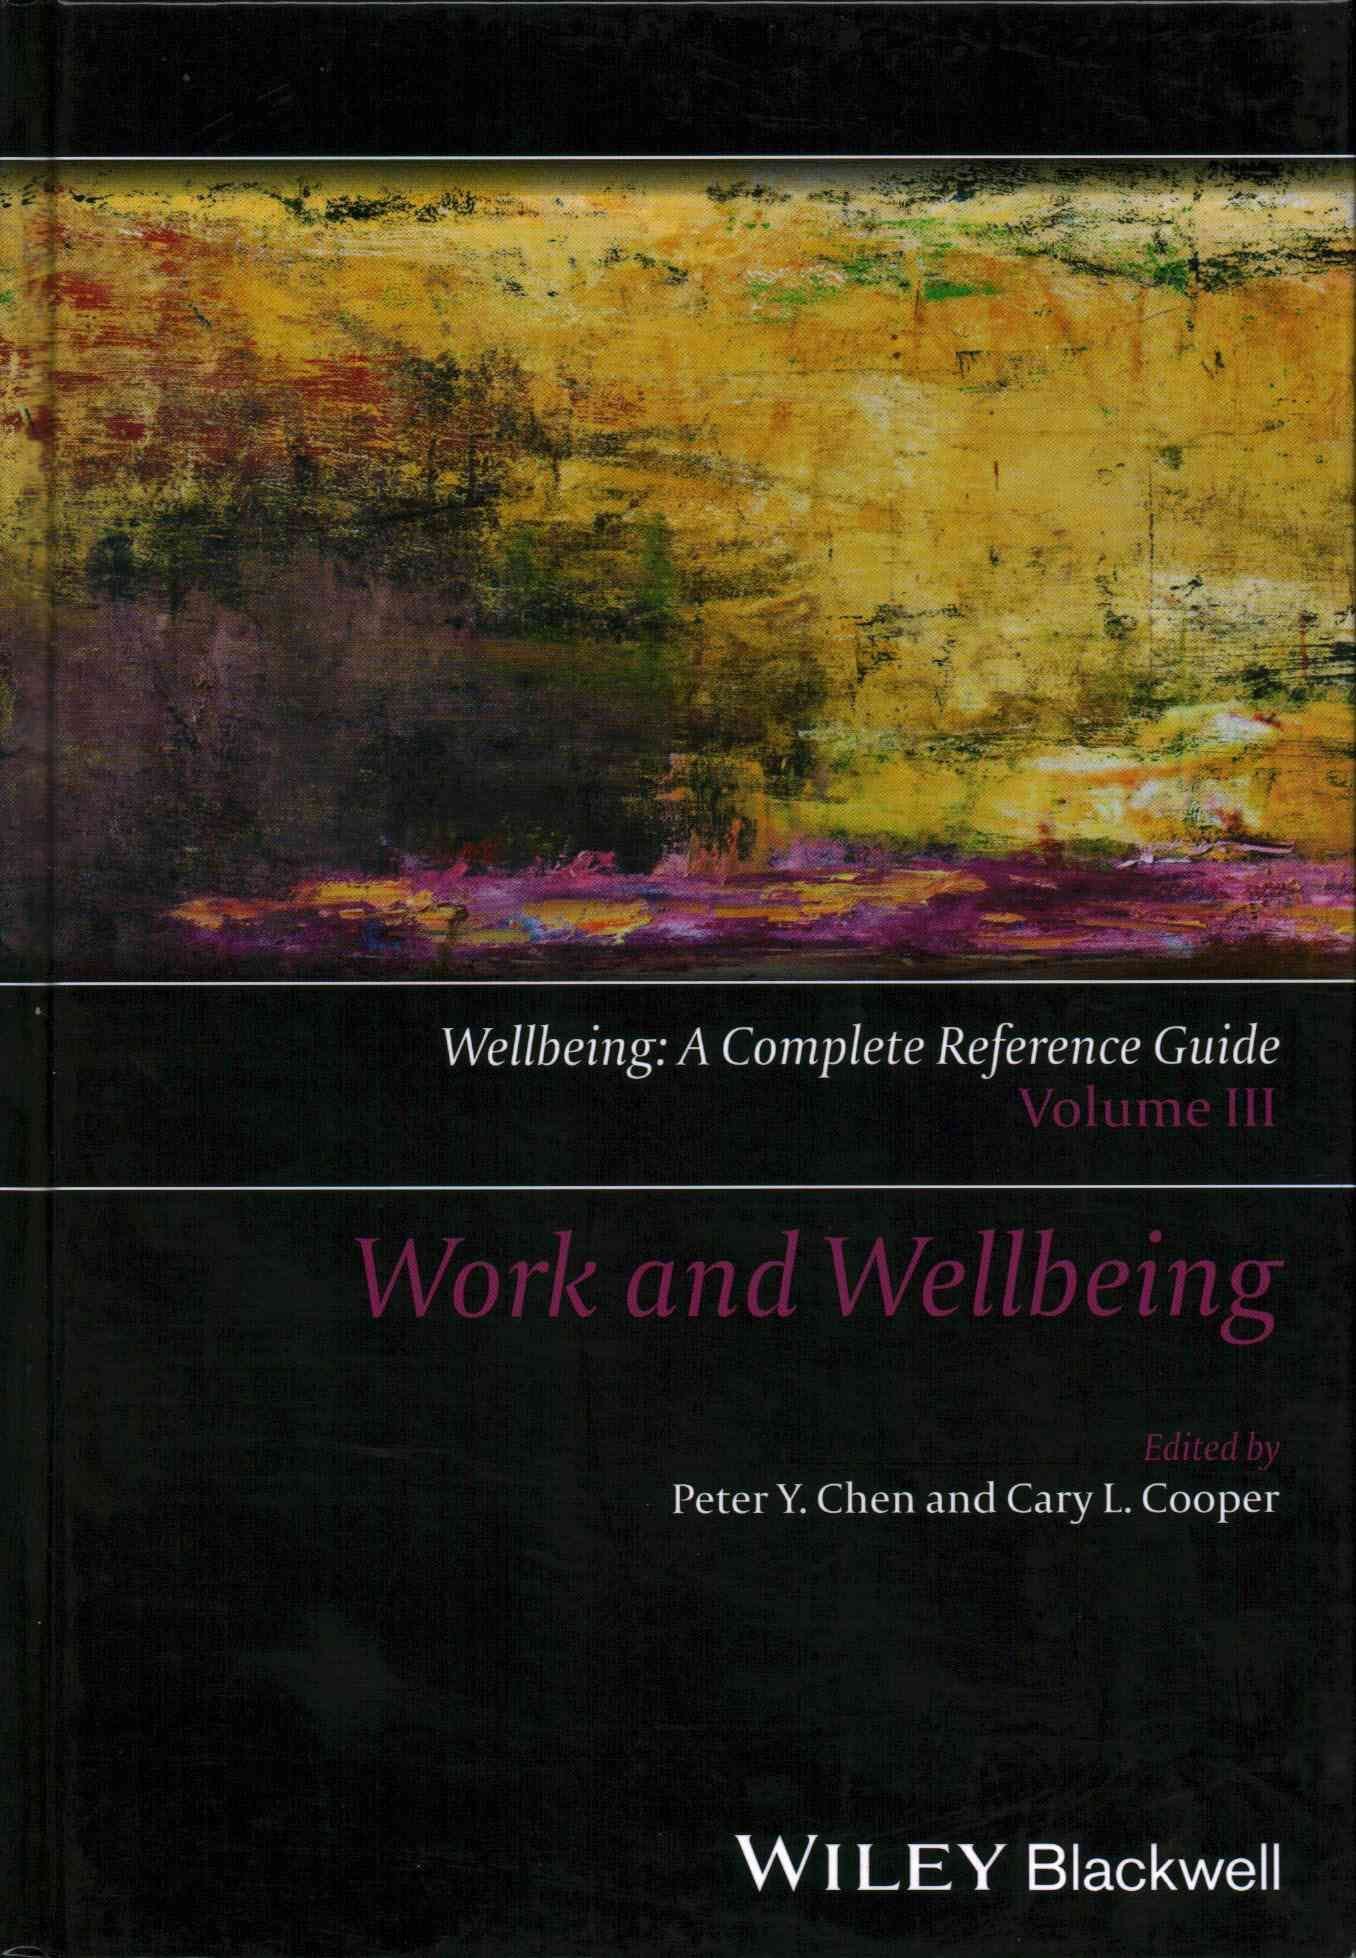 Work and Wellbeing - Wellbeing - A Complete Reference Guide Vol 3